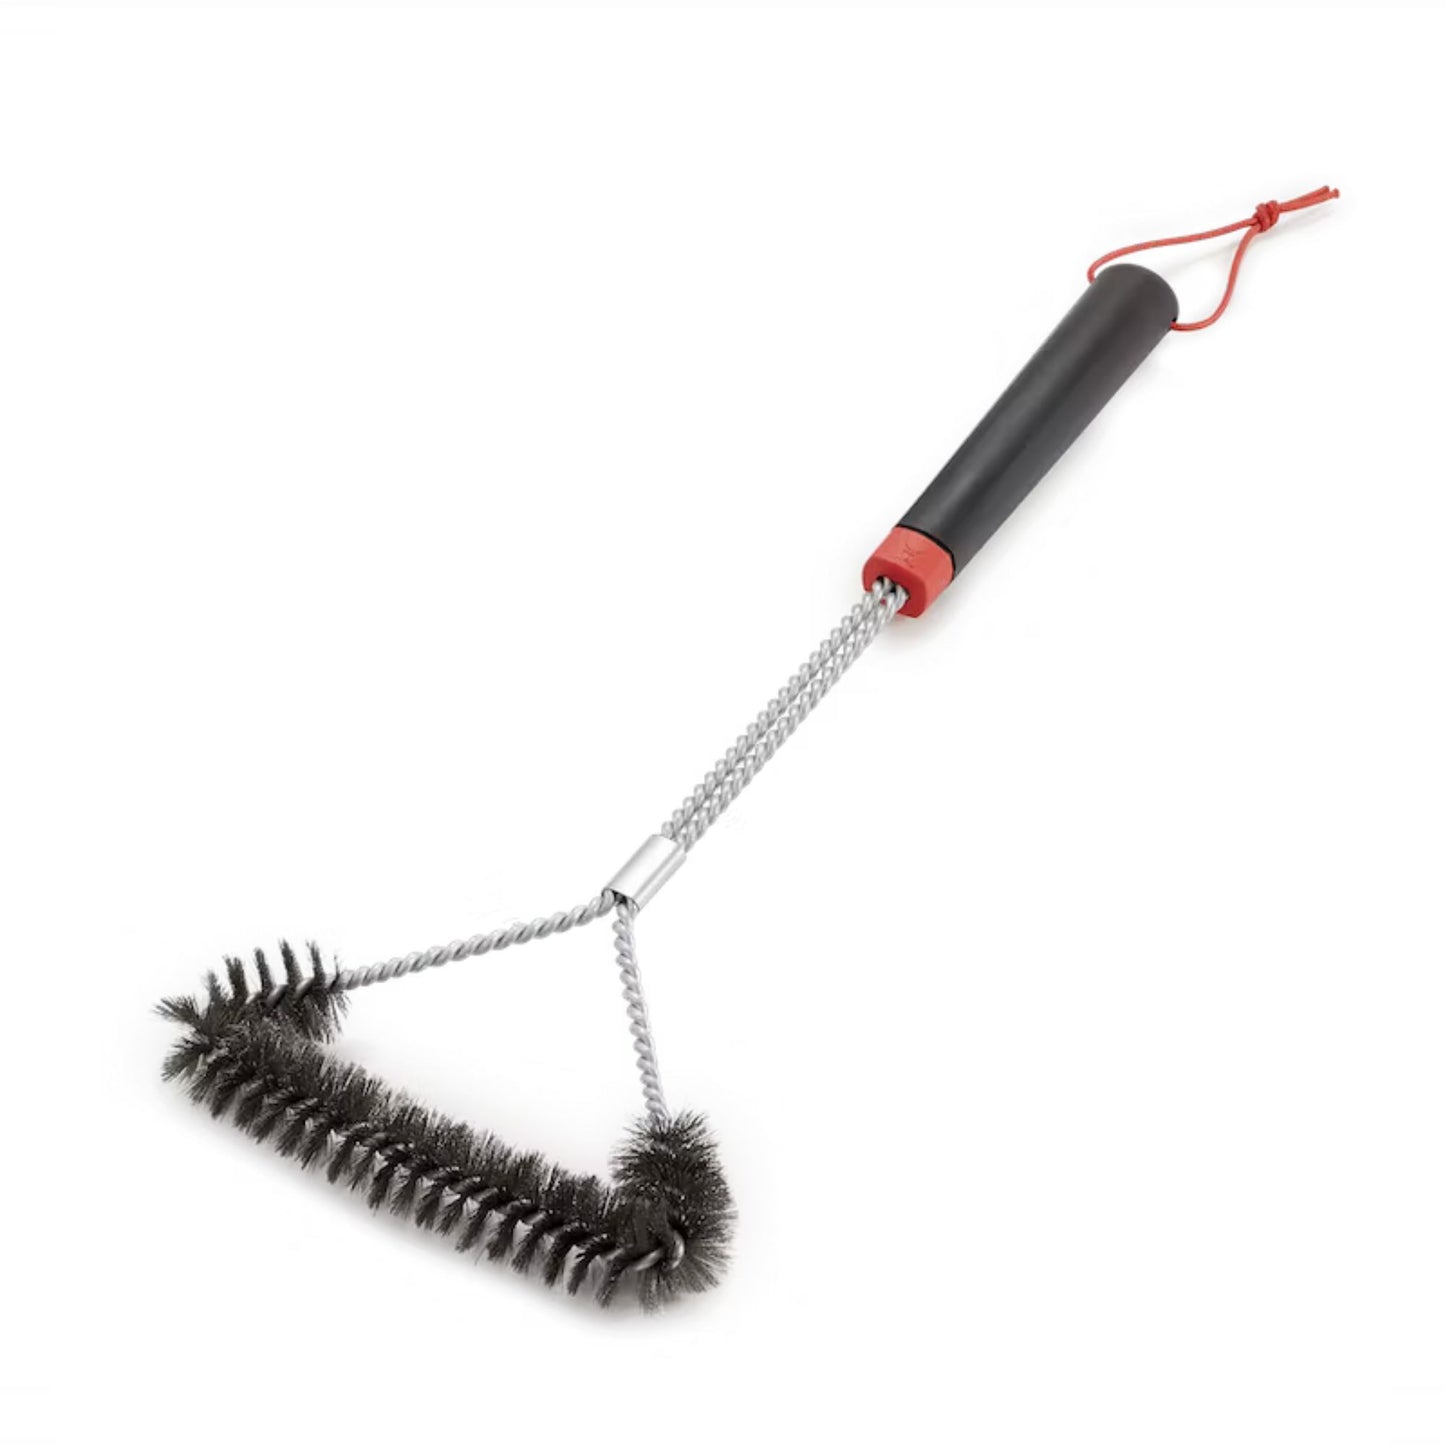 Three Sided 18-in Grill Brush